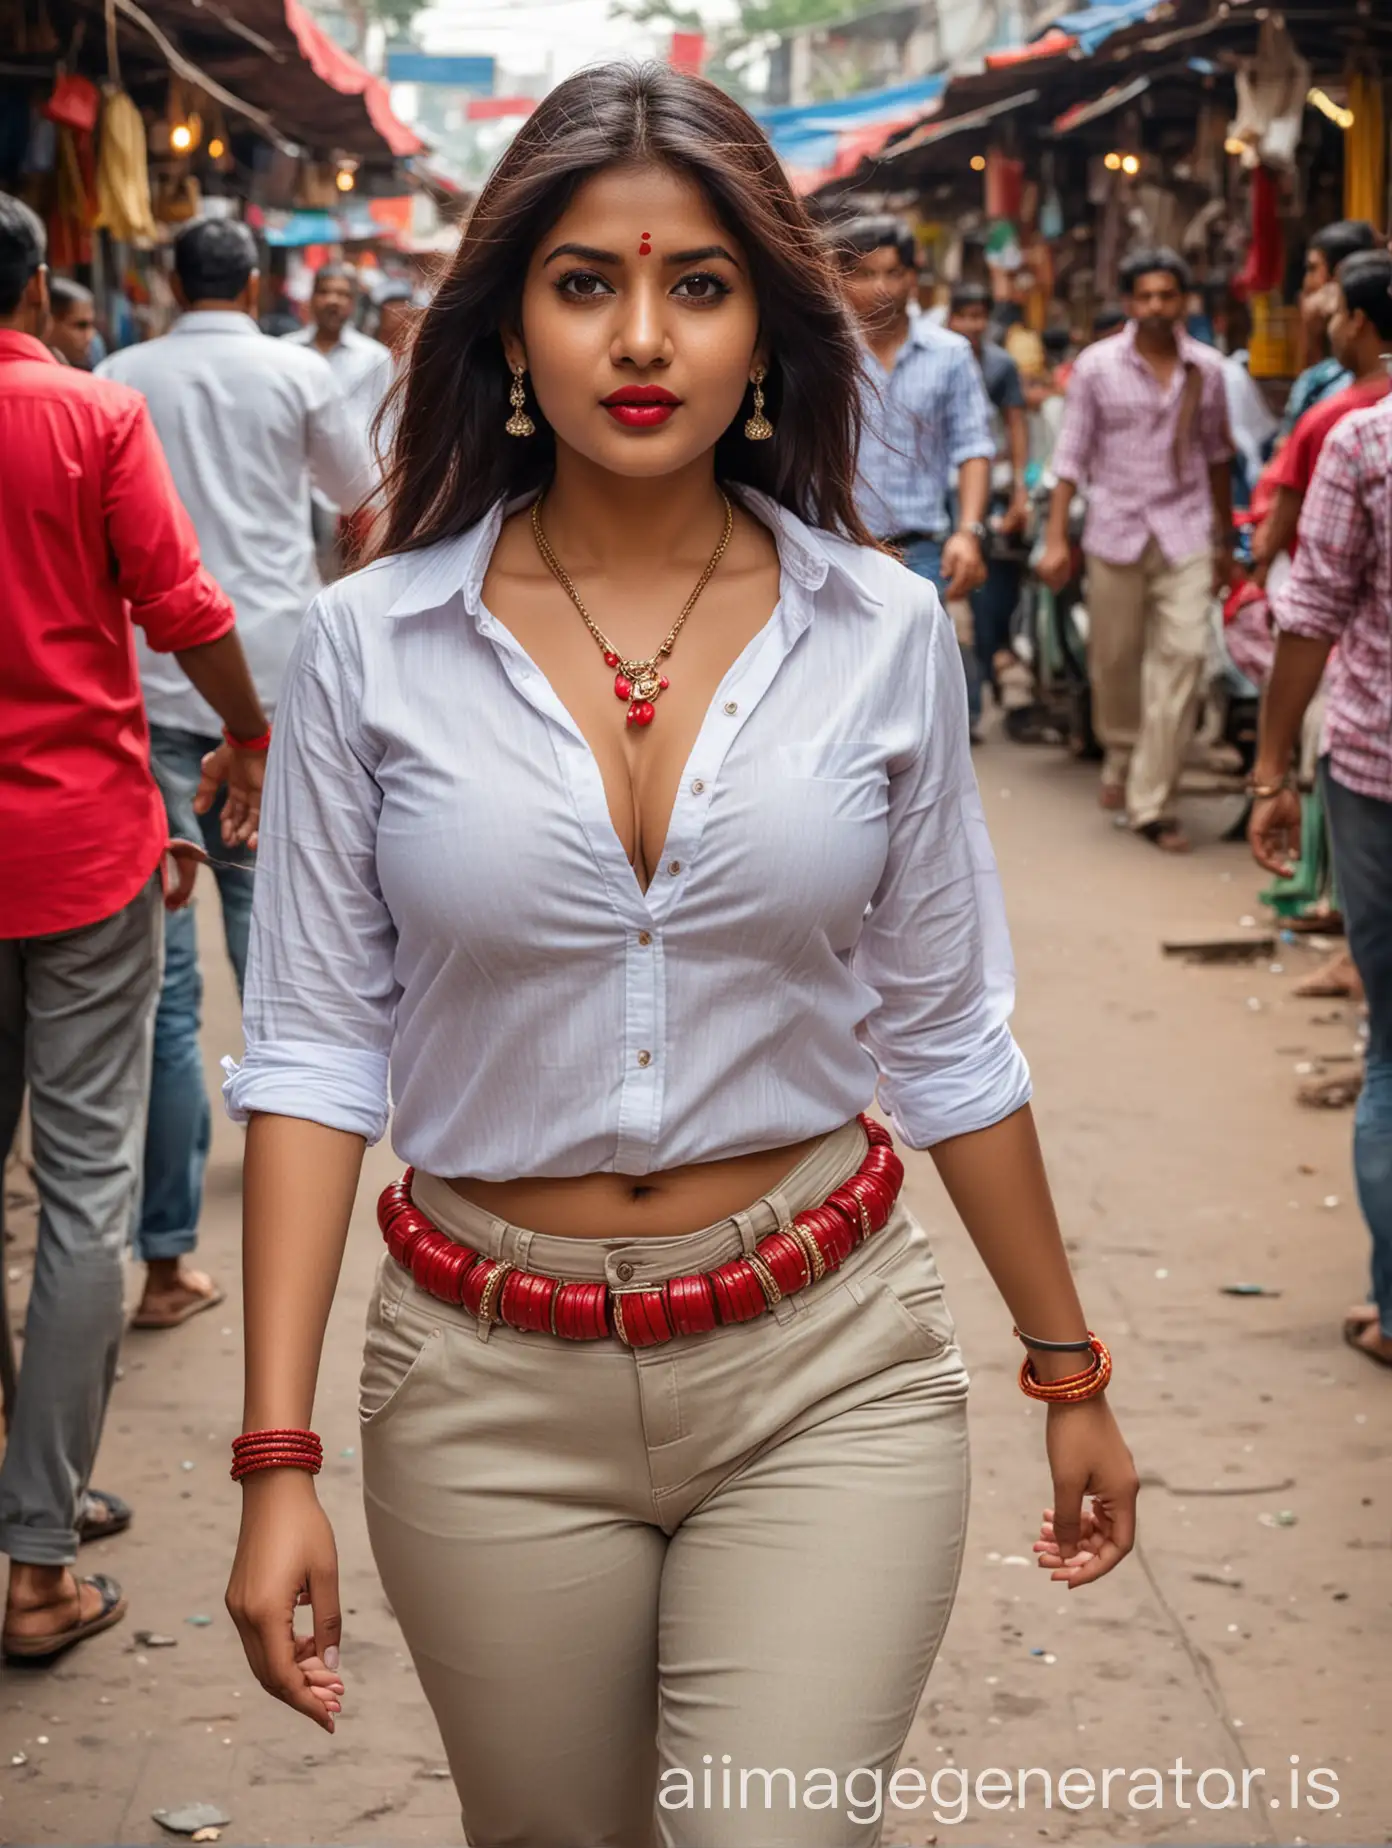 Indian-Busty-Lady-in-Red-Lipstick-and-Shirt-Walking-Candidly-in-Market